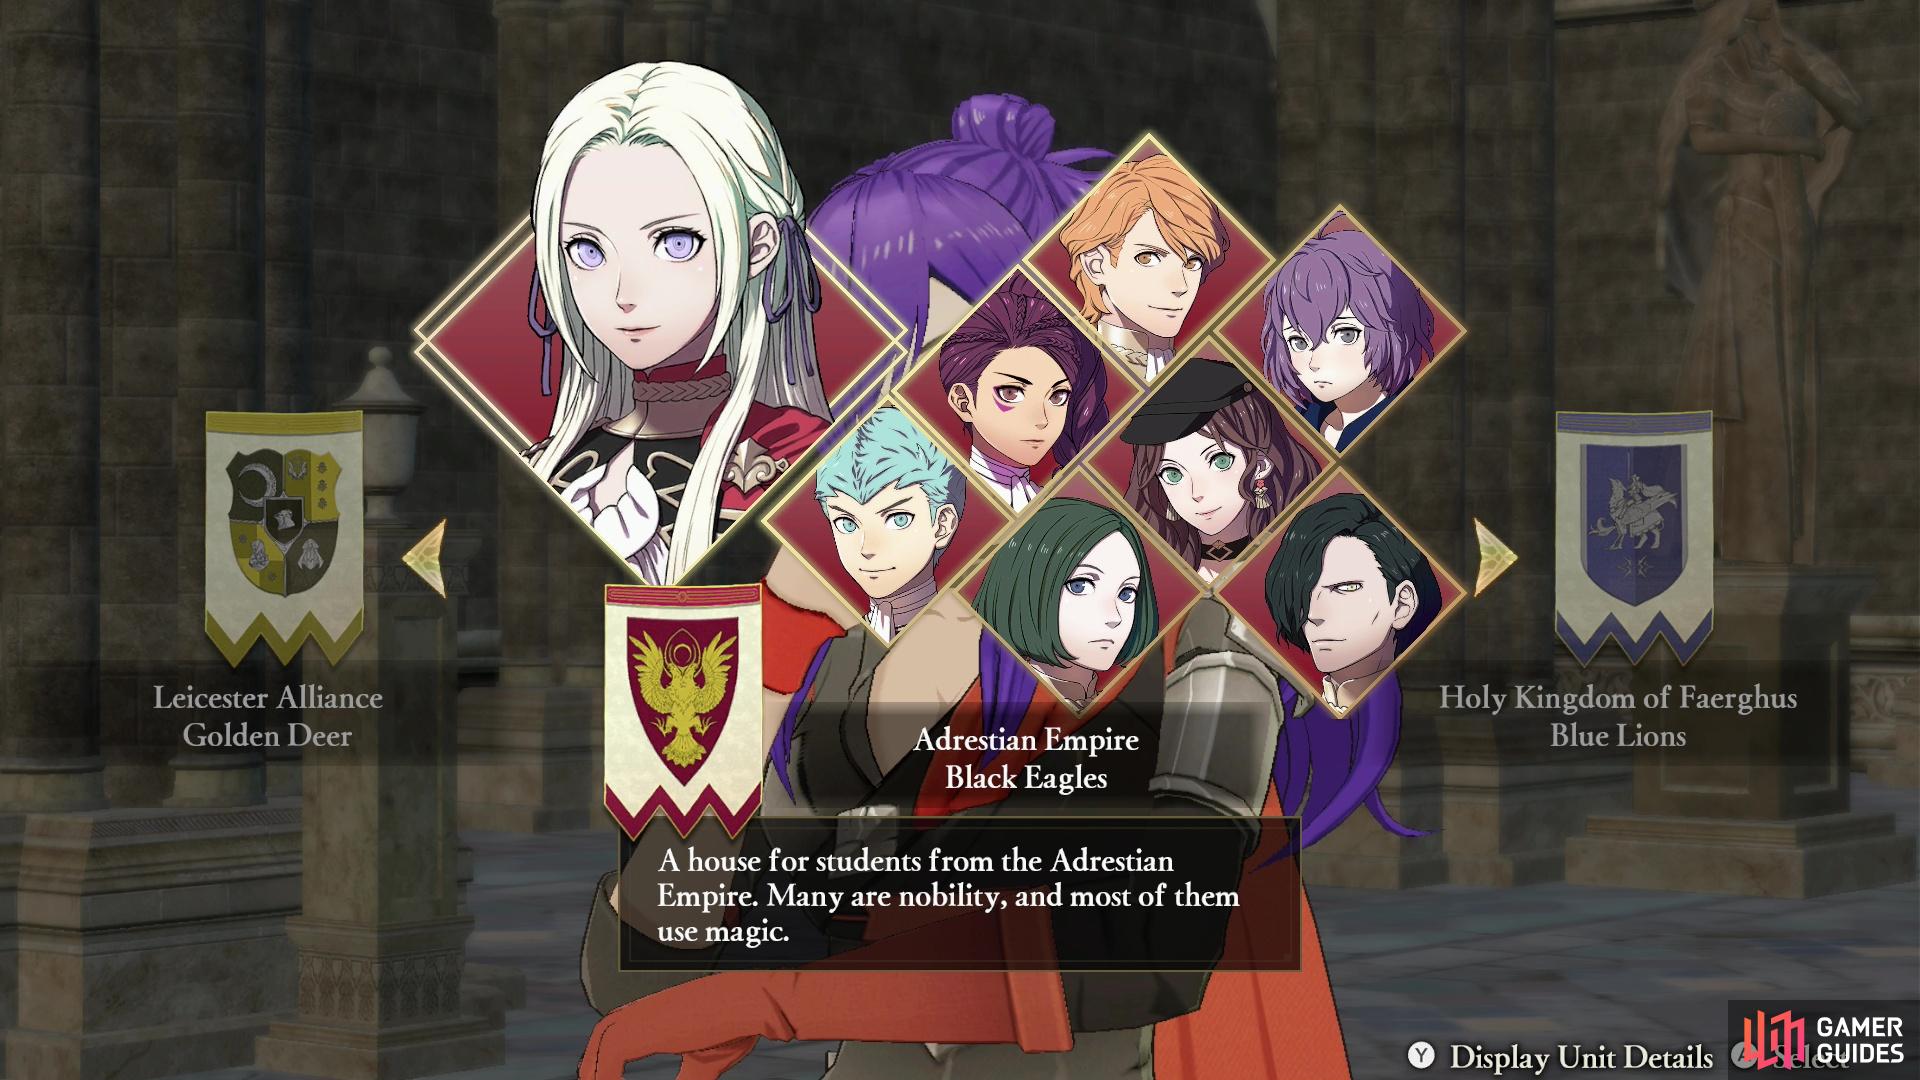 If you pick the Black Eagles, Linhardt will be one of your starting characters.